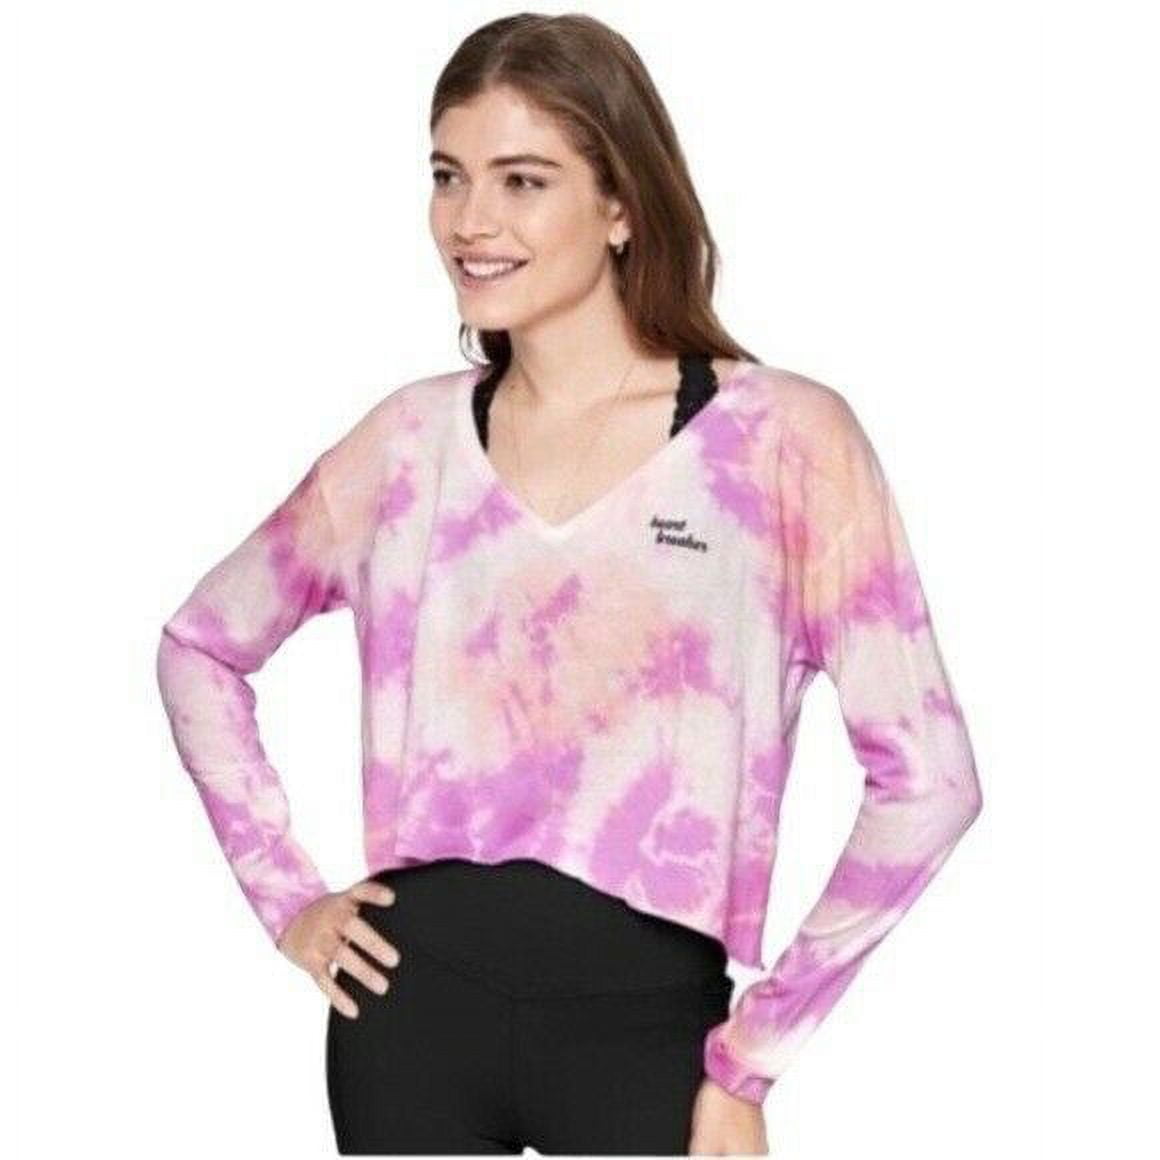 Victoria's Secret PINK Tie Dye Long Sleeve Cropped T-Shirt Top Pink L, $30  NWT 